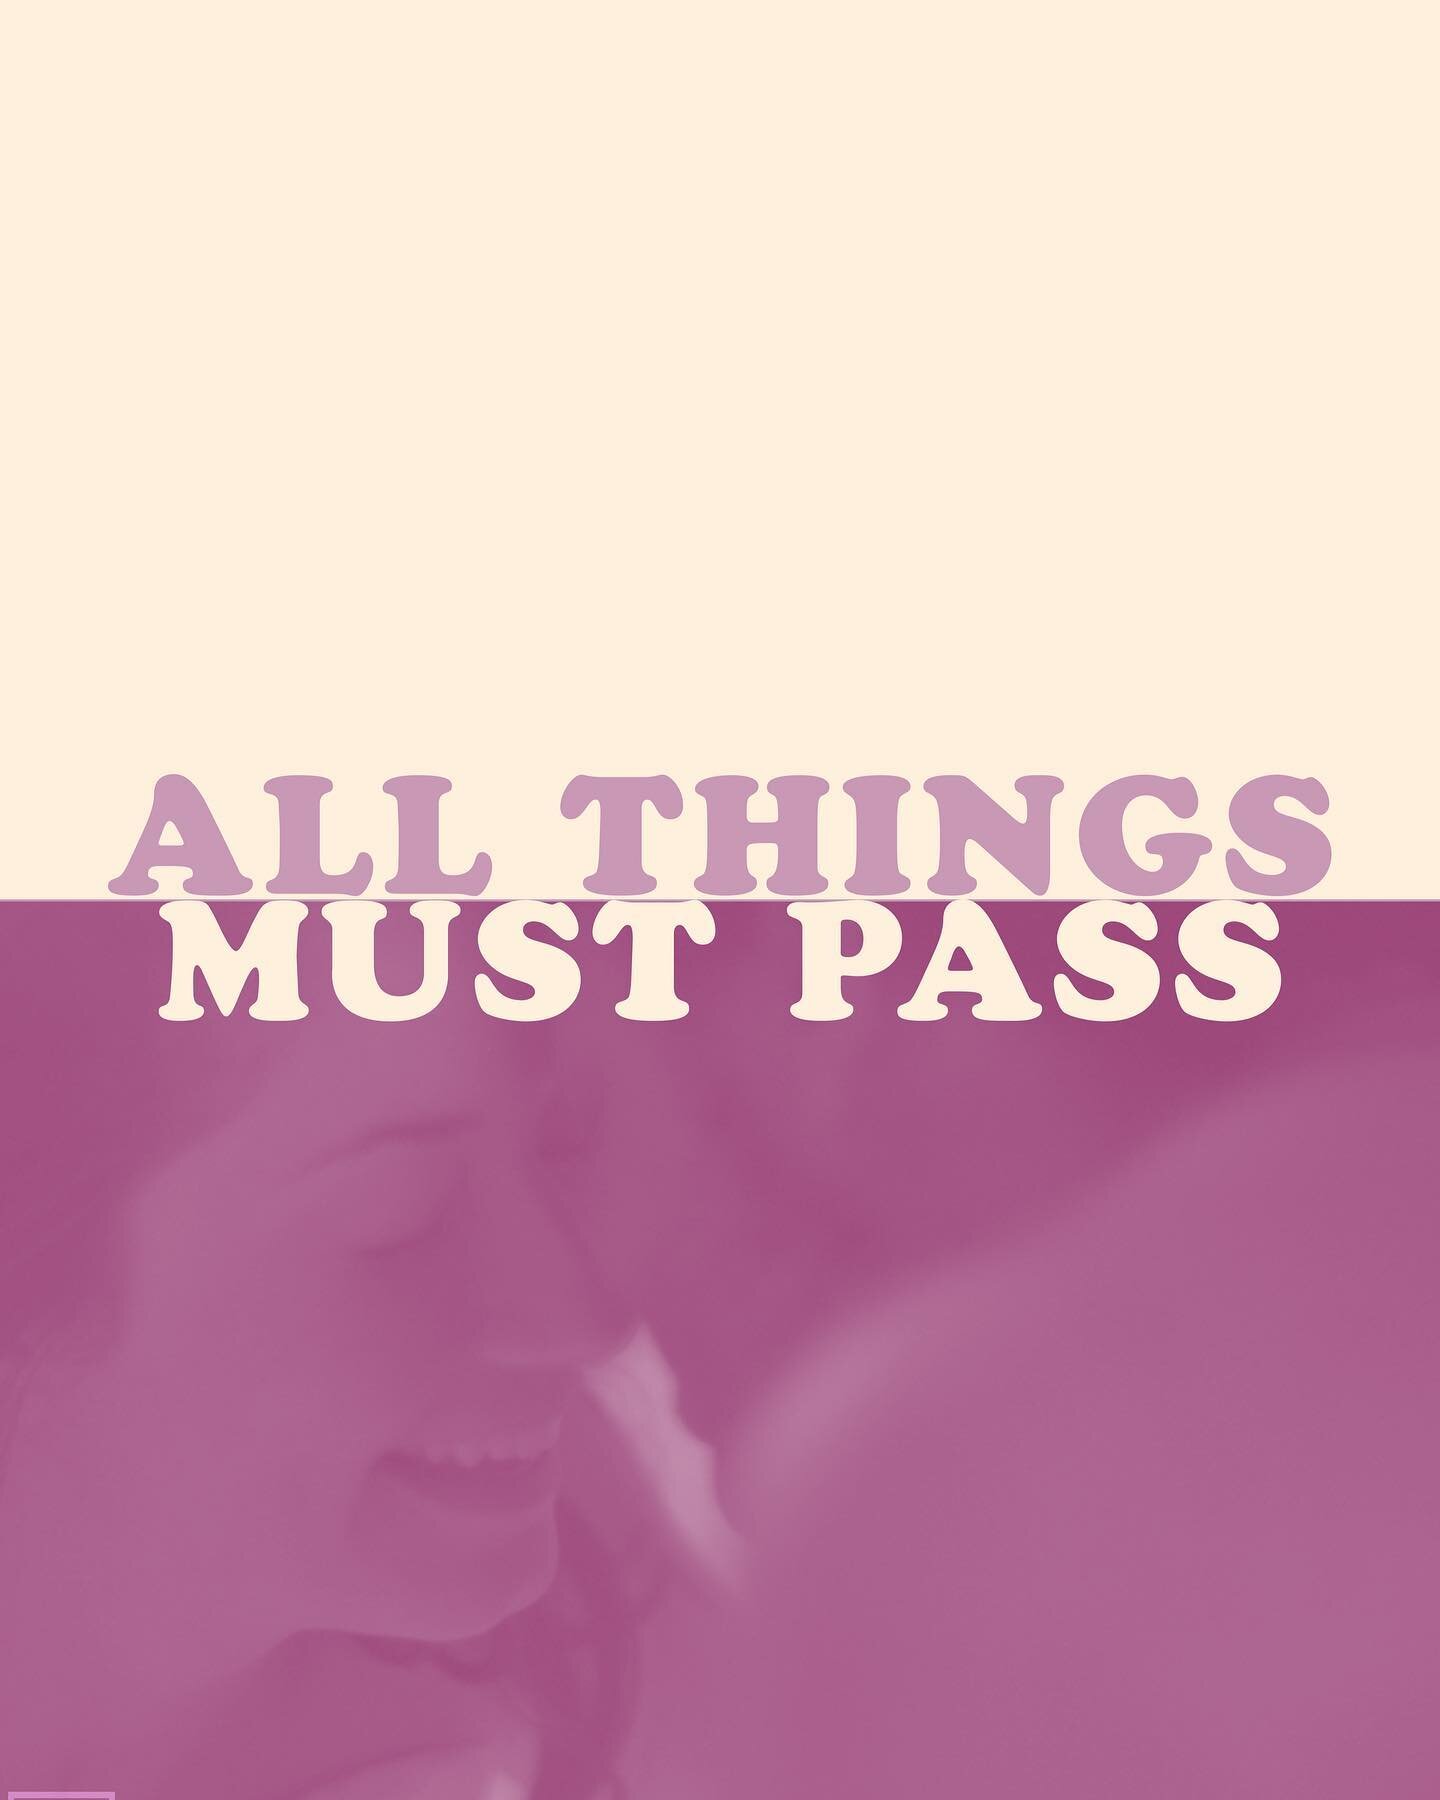 Posters for each part of All Things Must Pass. 

Hit the link in our bio n the bio for the full anthology.